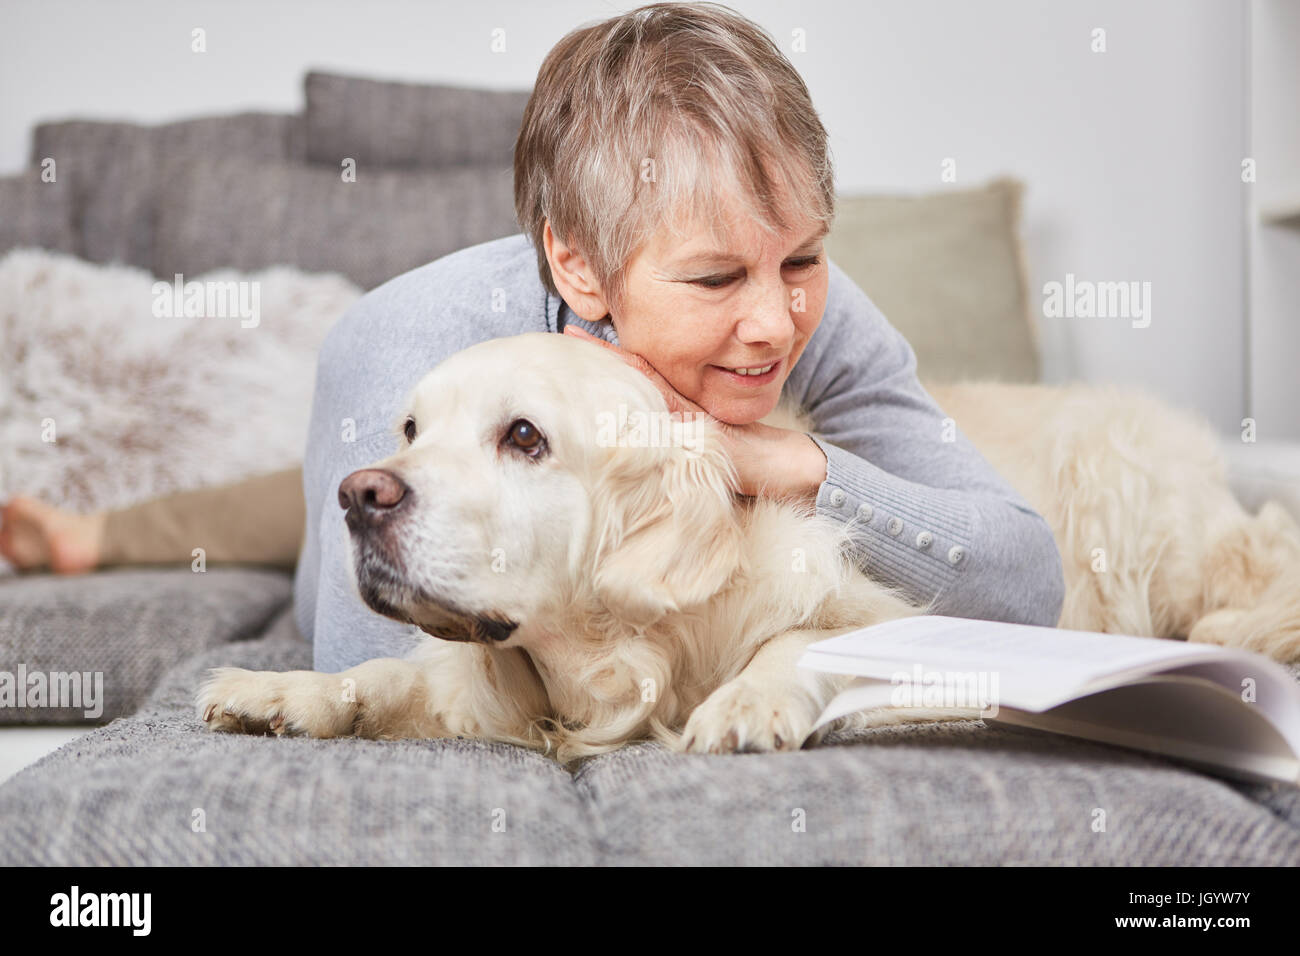 Senior woman in relaxation with dog cuddles on the couch Stock Photo